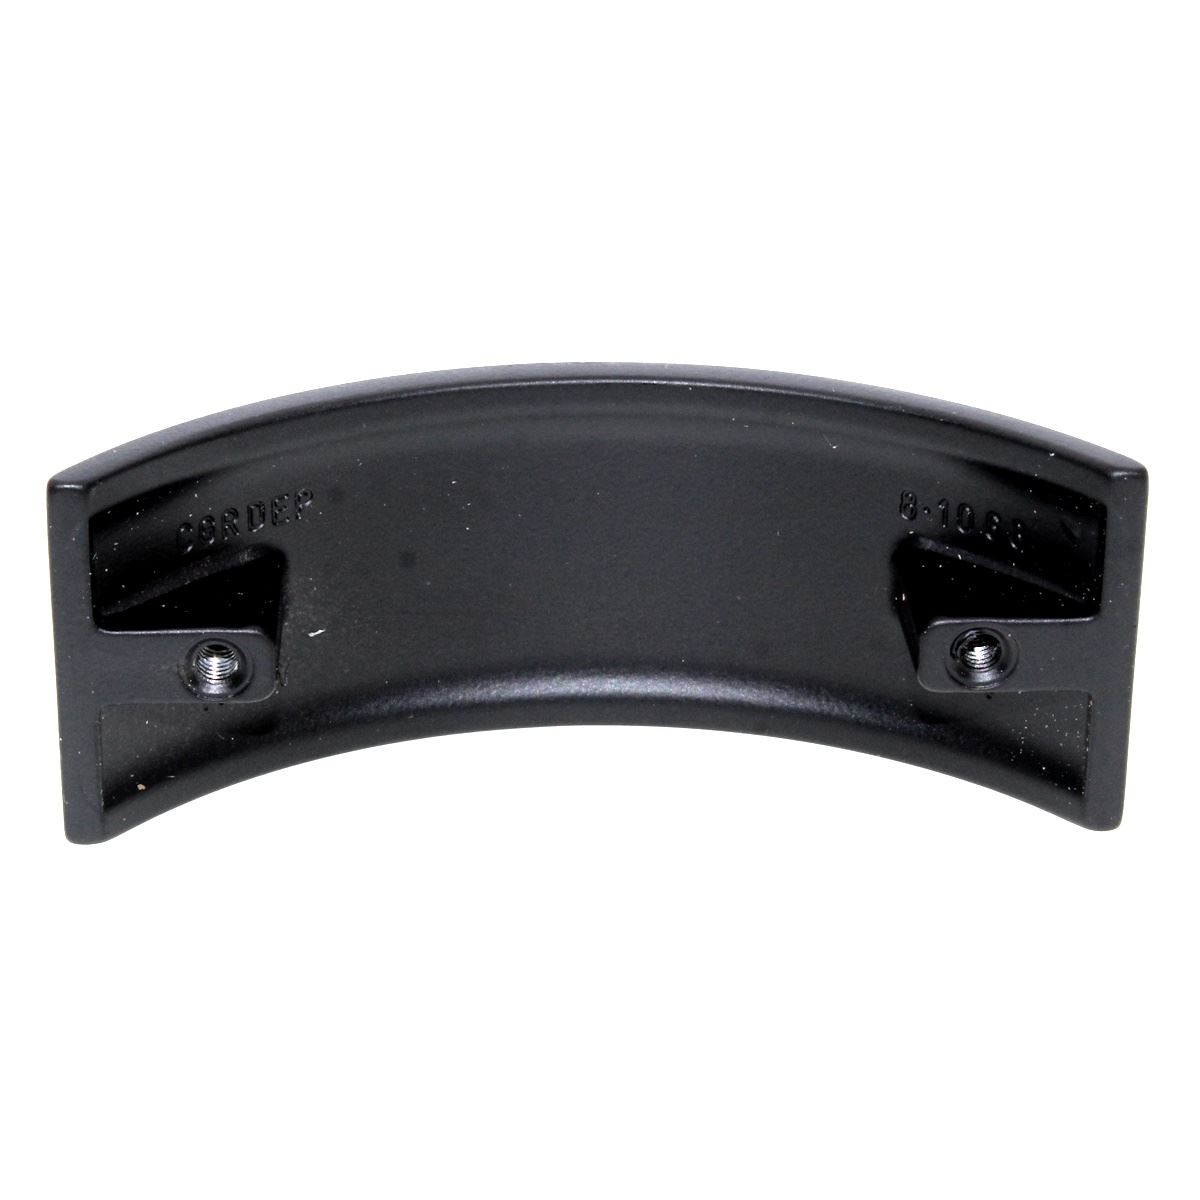 Schaub And Company Armadio Cabinet Pull 2 1/2" (64mm) Ctr Matte Black 362-MB